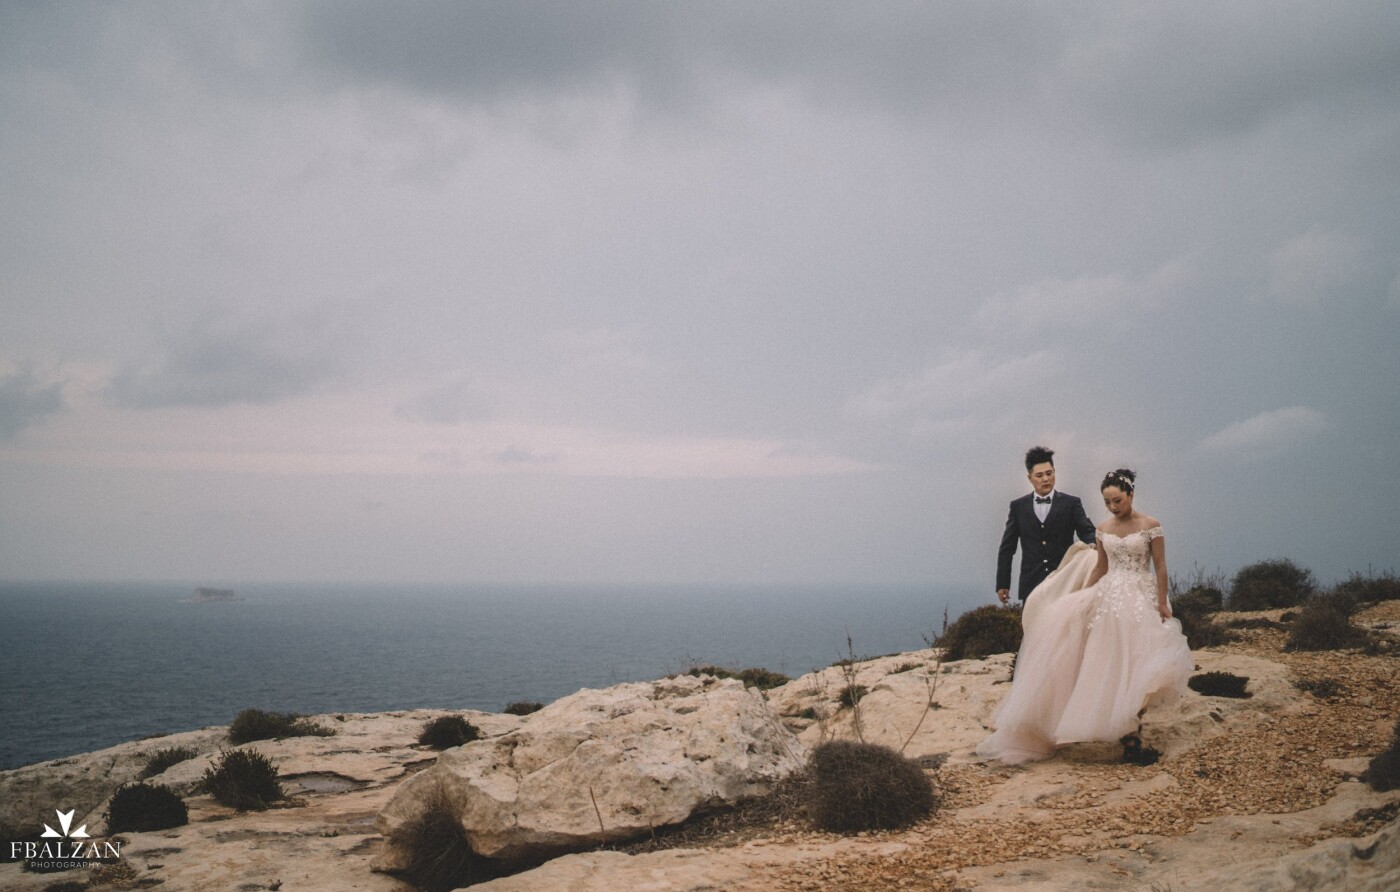 Venturing through the beauty of nature in this destination wedding couple here in Malta.